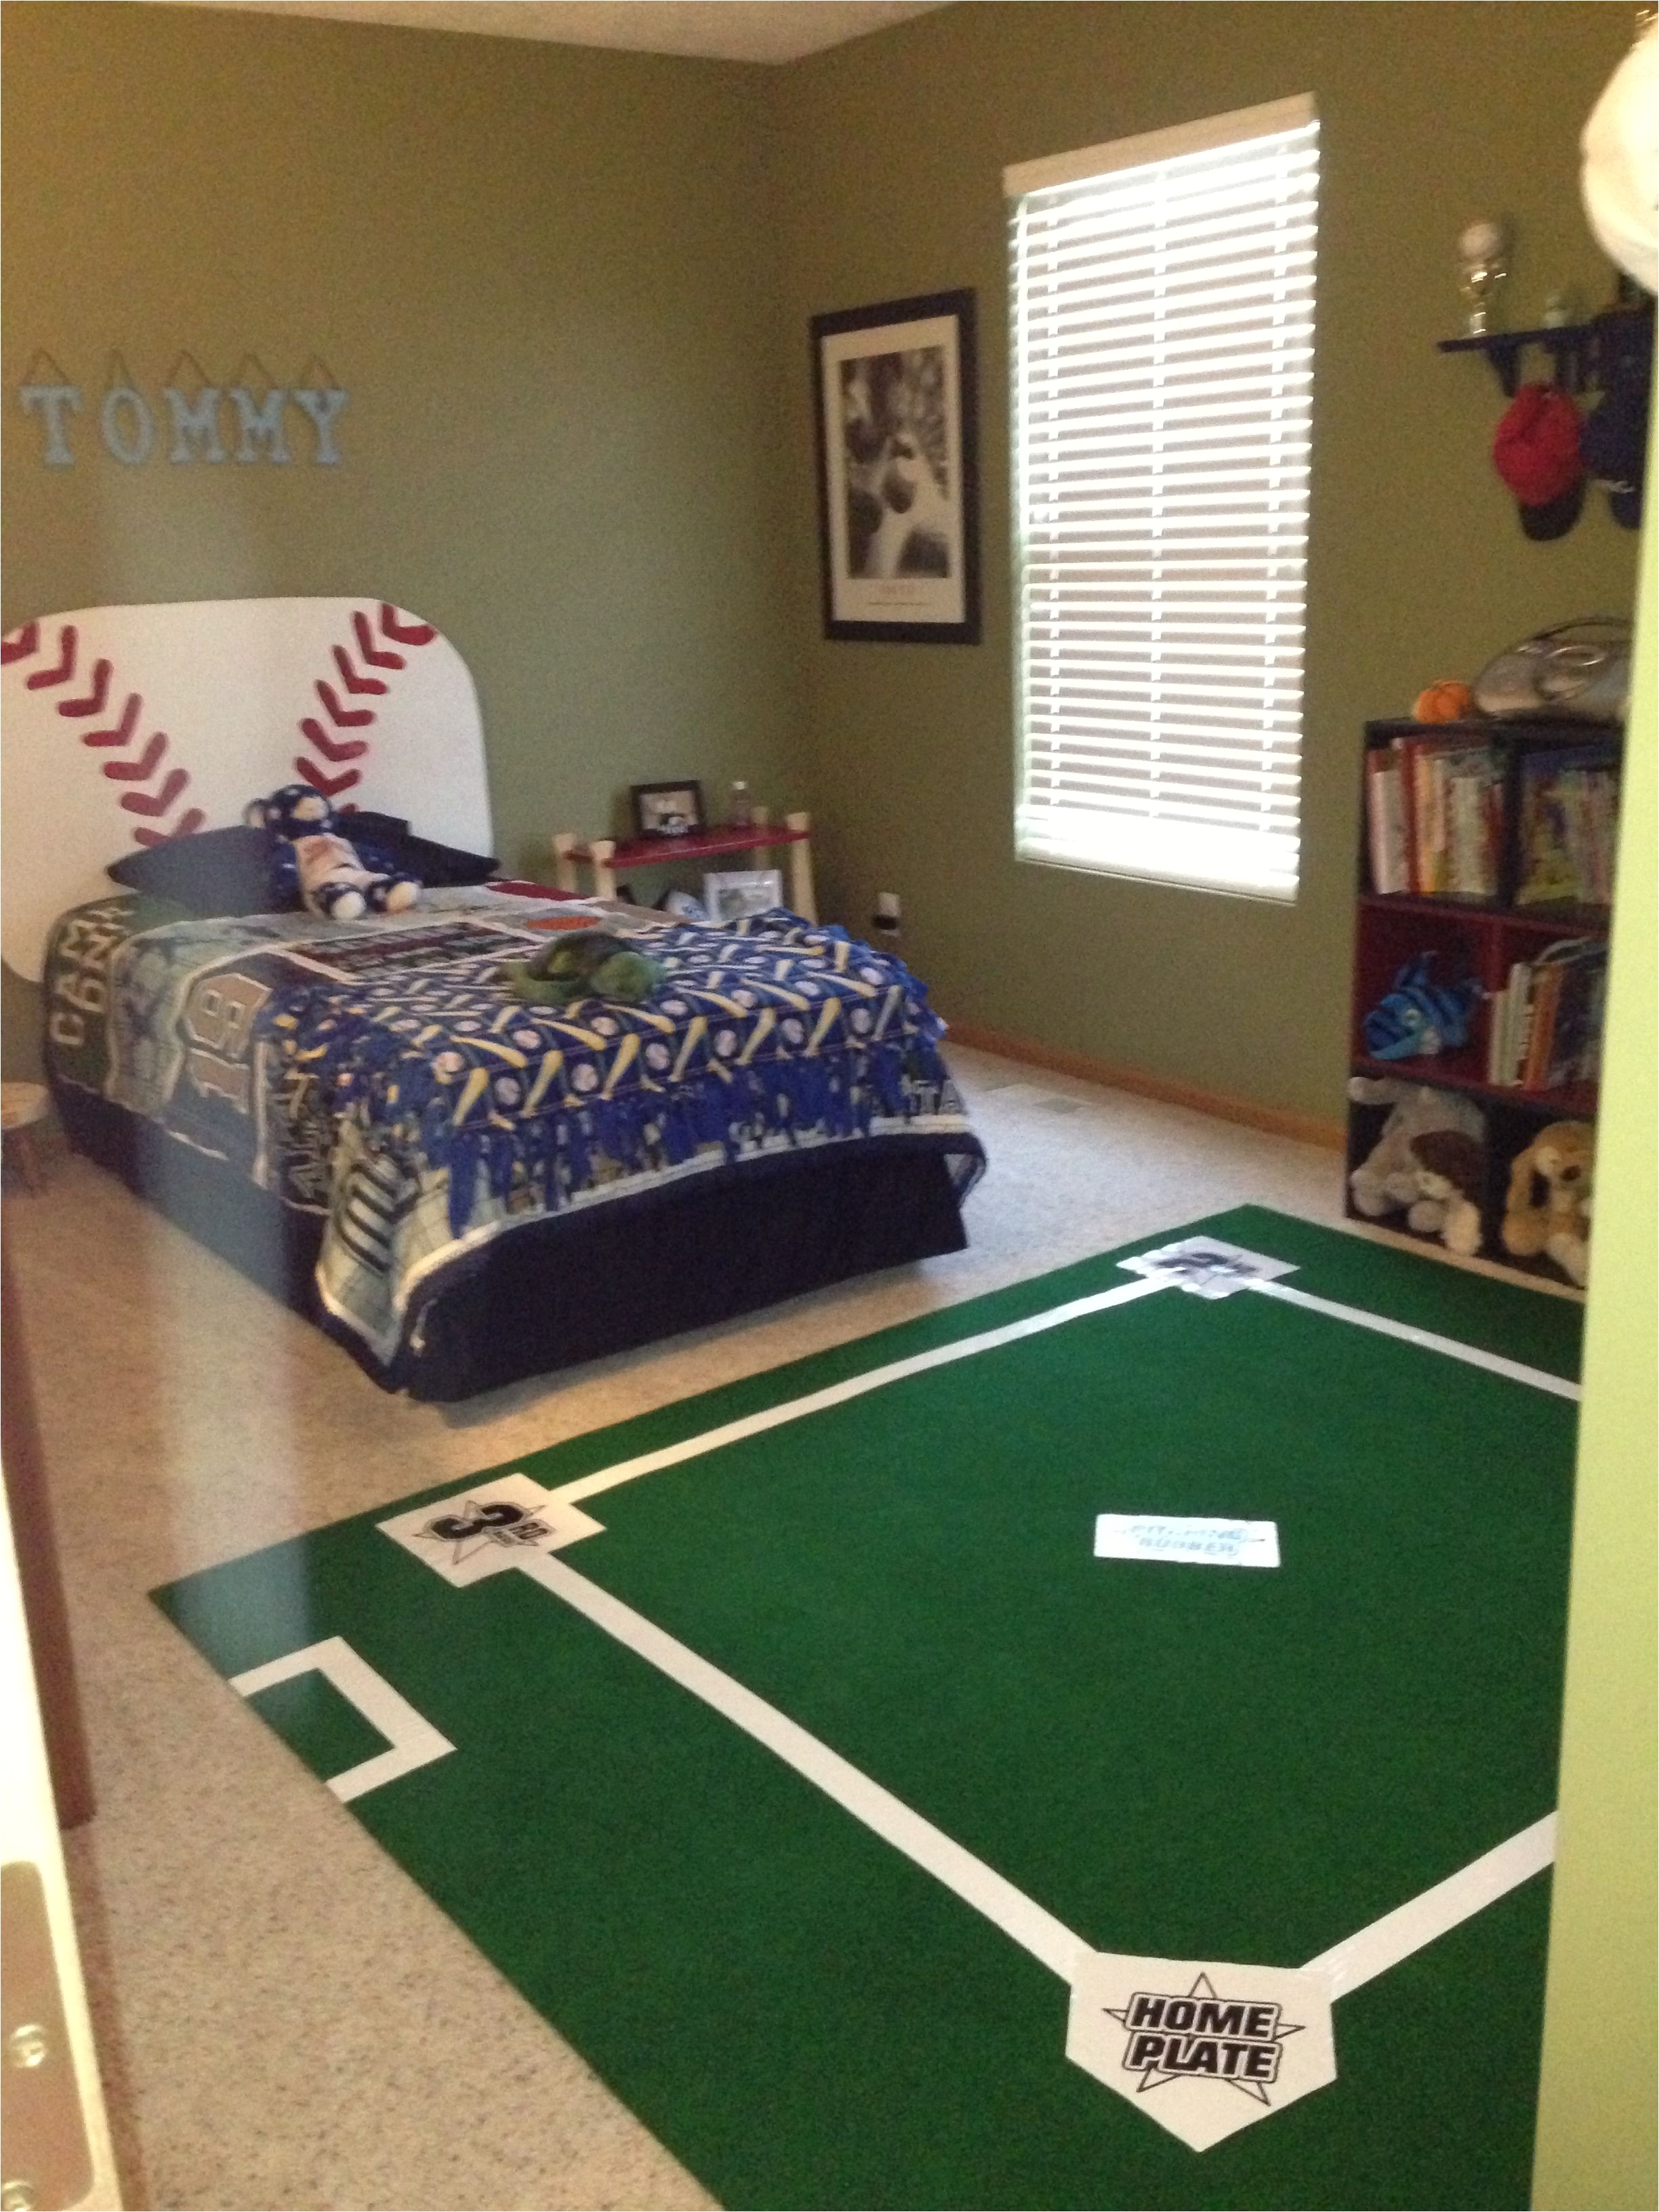 diy baseball field rug for baseball lovers room went to menards and got 6 x 7 golf green used white duck tape to create baselines and dugout